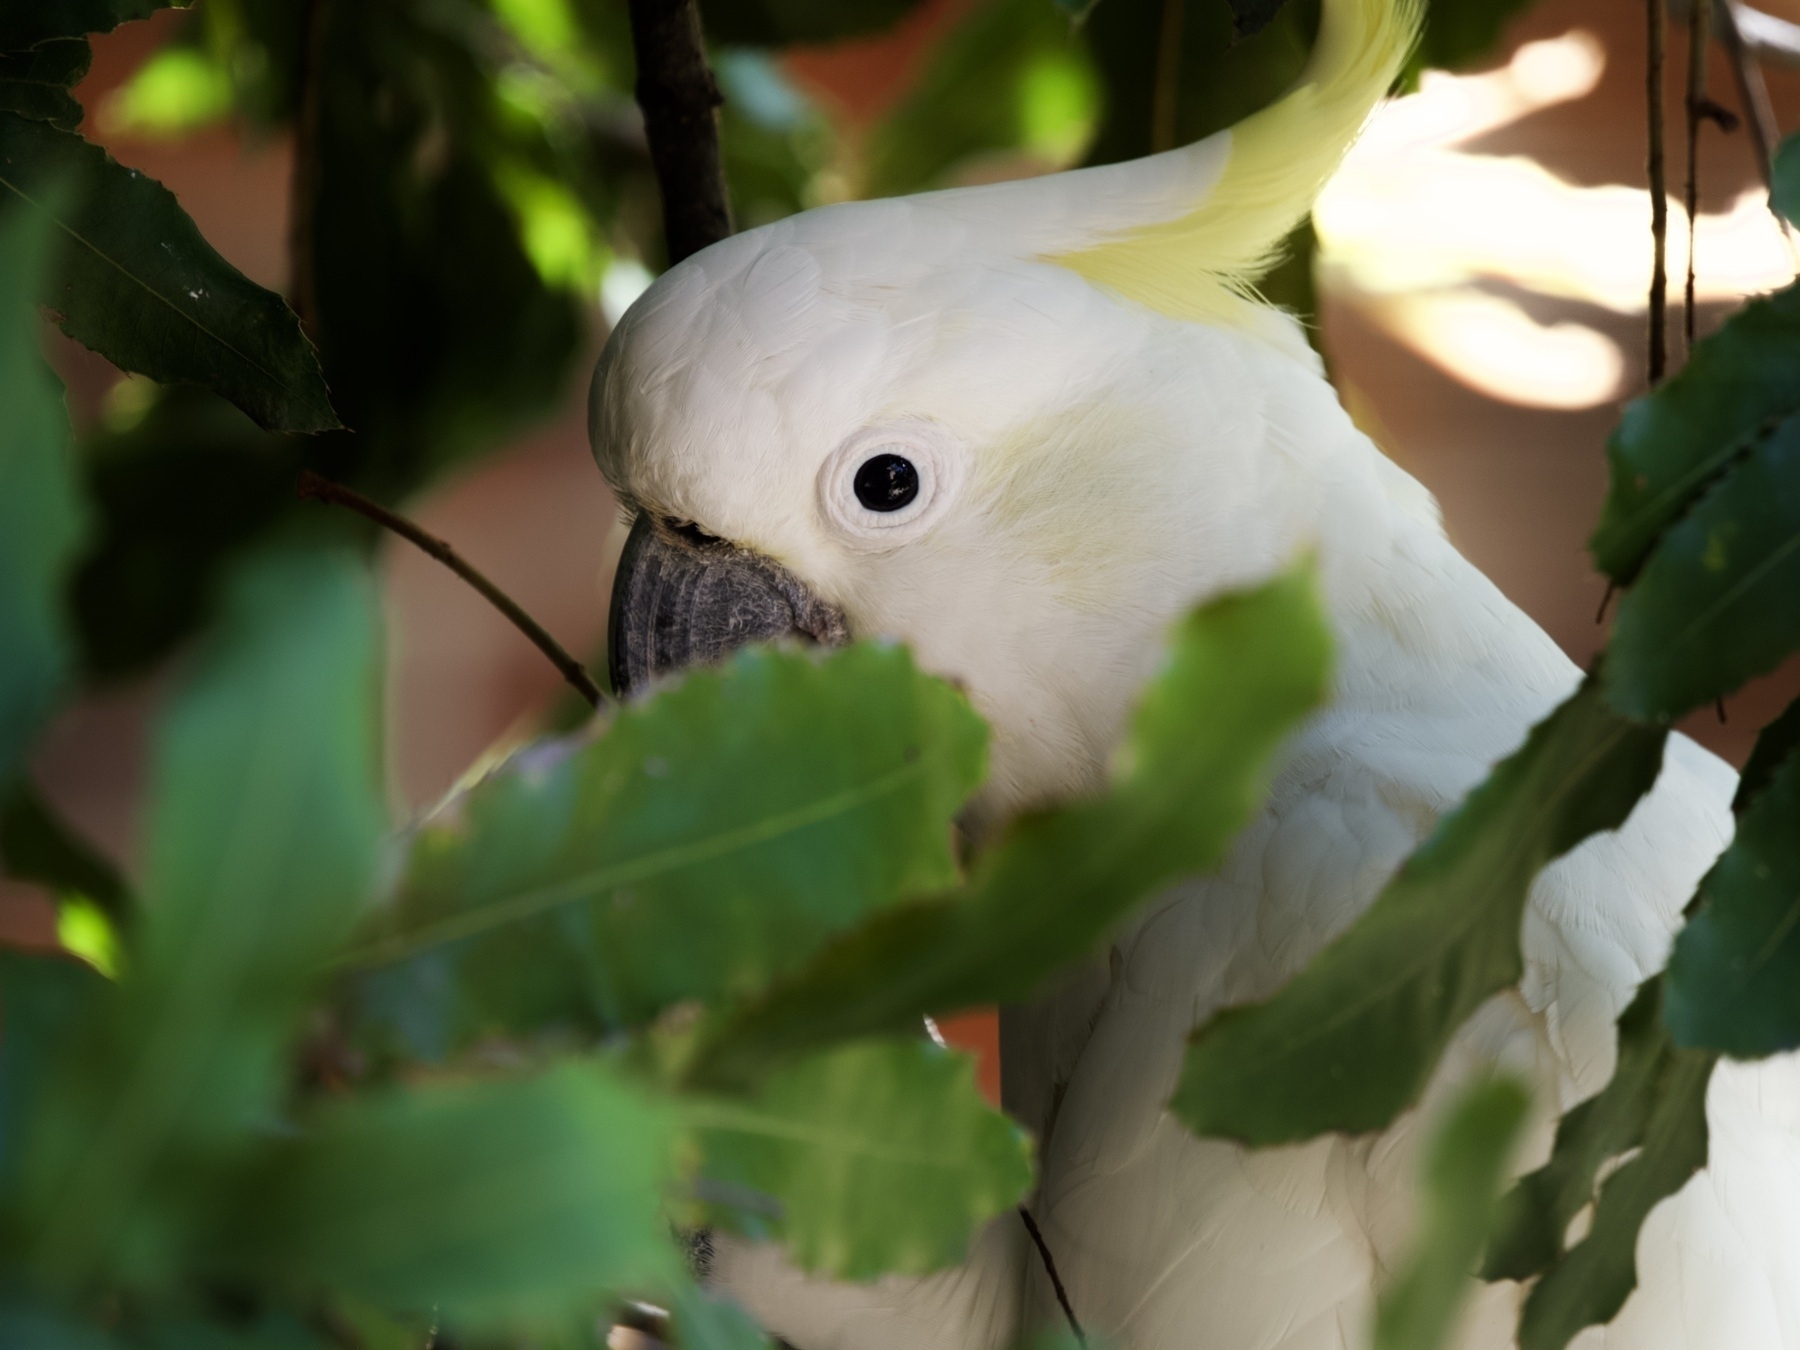 An obscured cockatoo looks at the camera through the leaves of a macadamia tree.